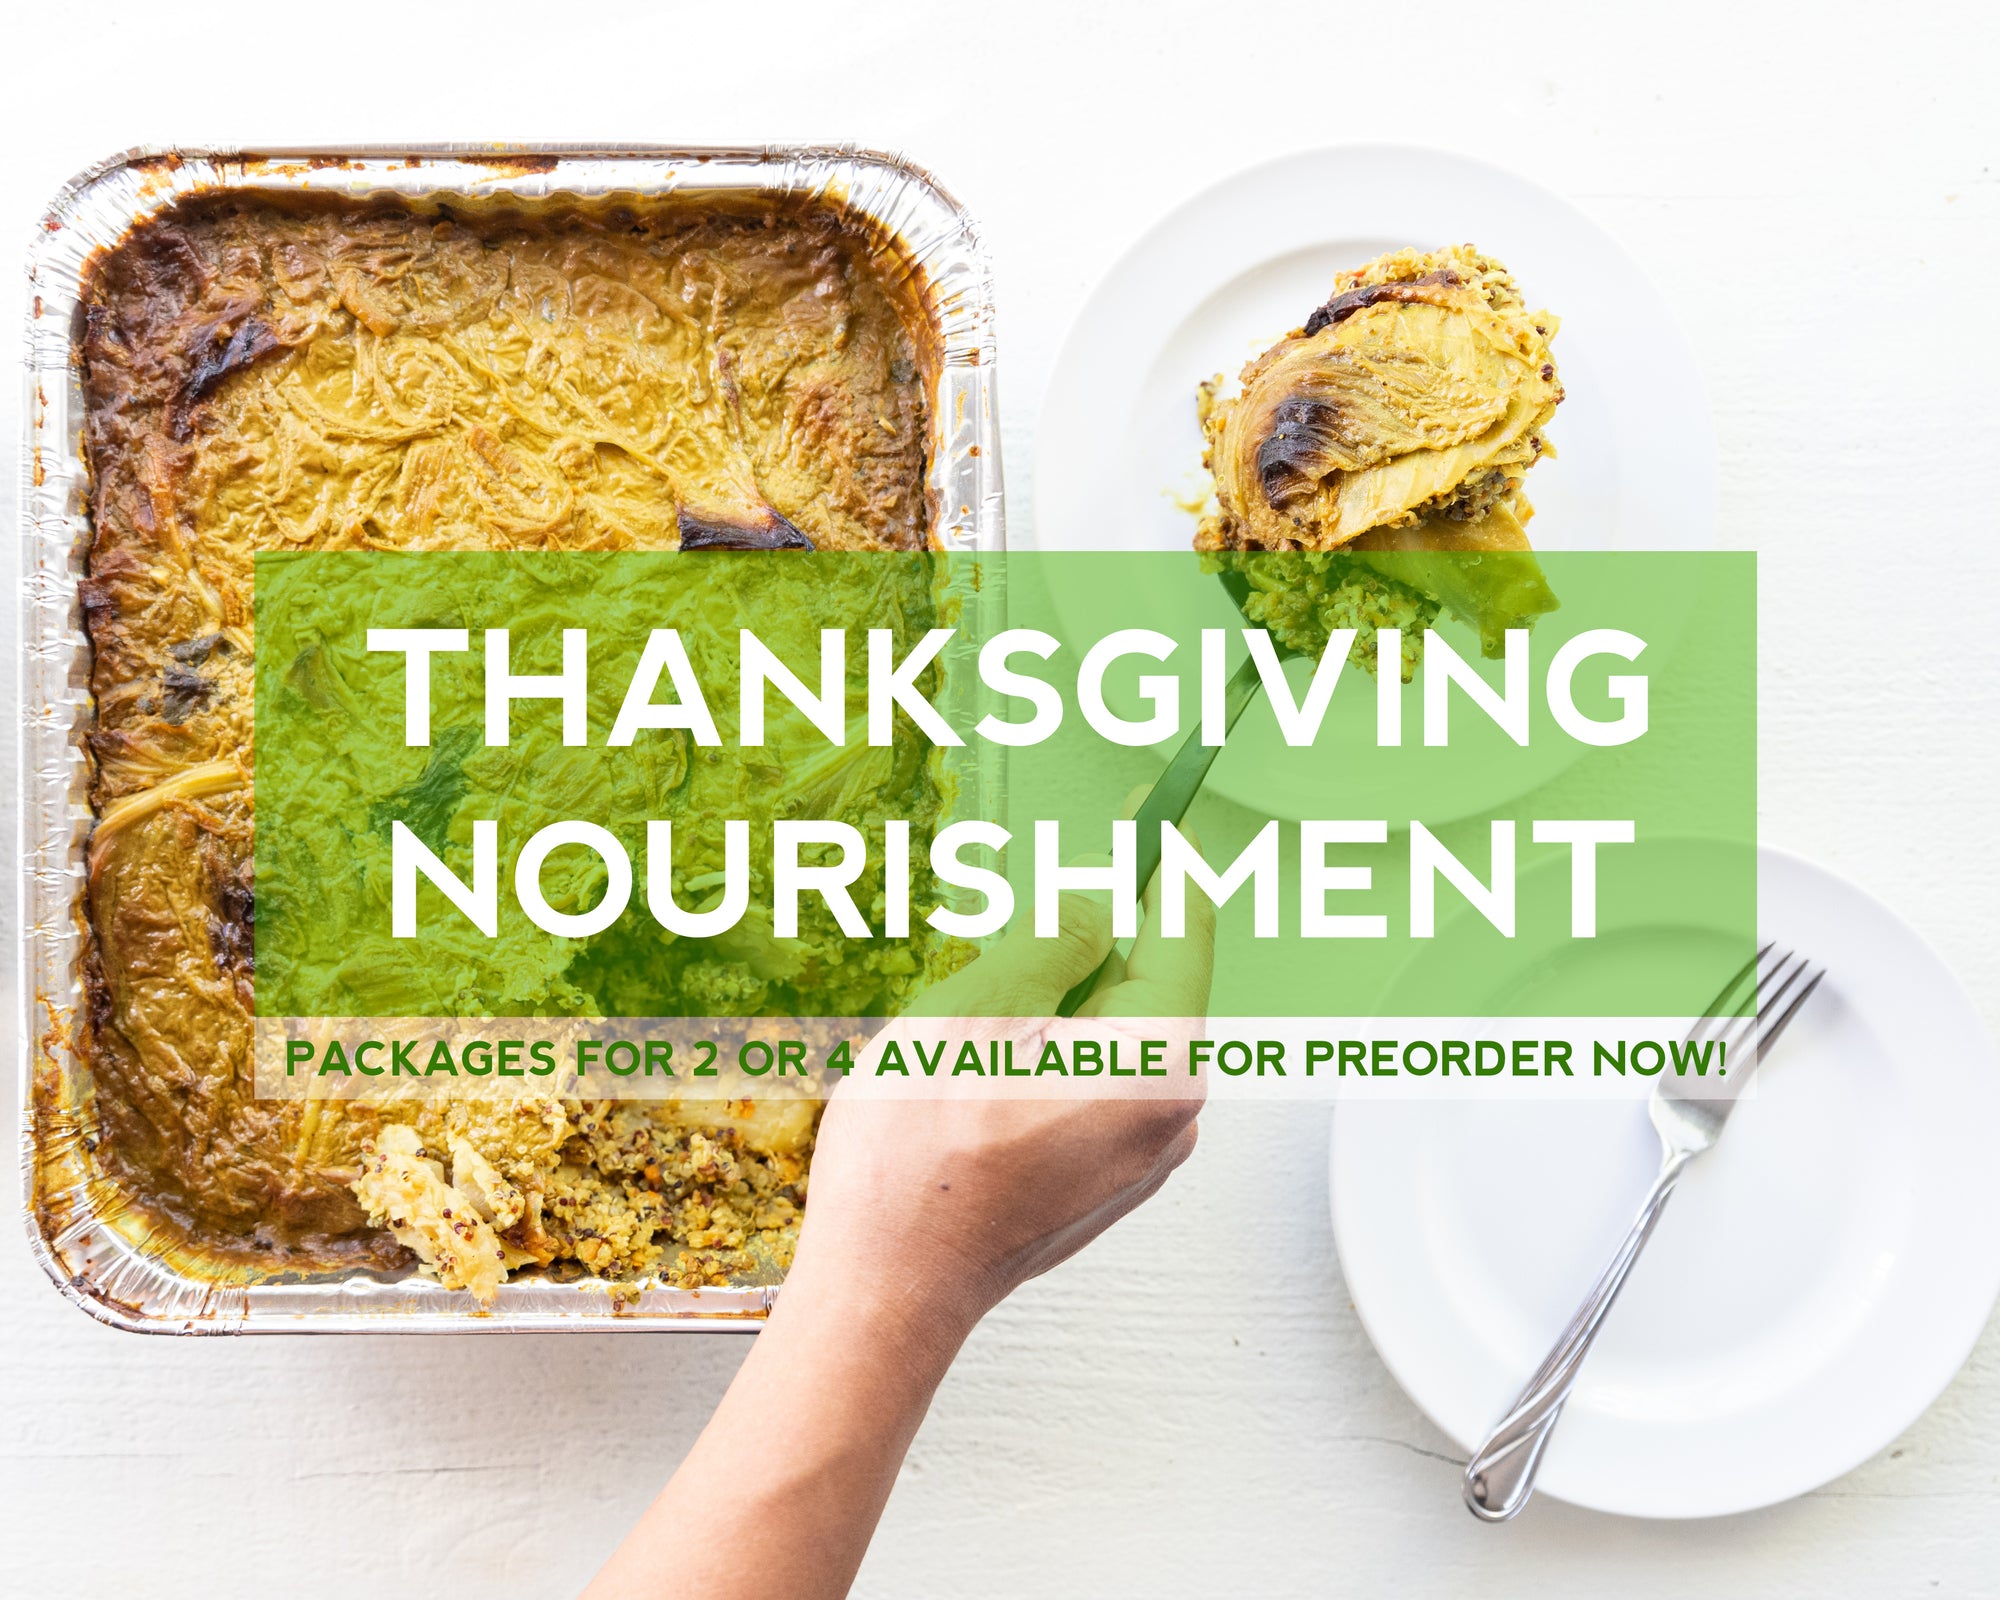 Our Thanksgiving Menu is live - preorder now for delivery November 23rd or 24th!